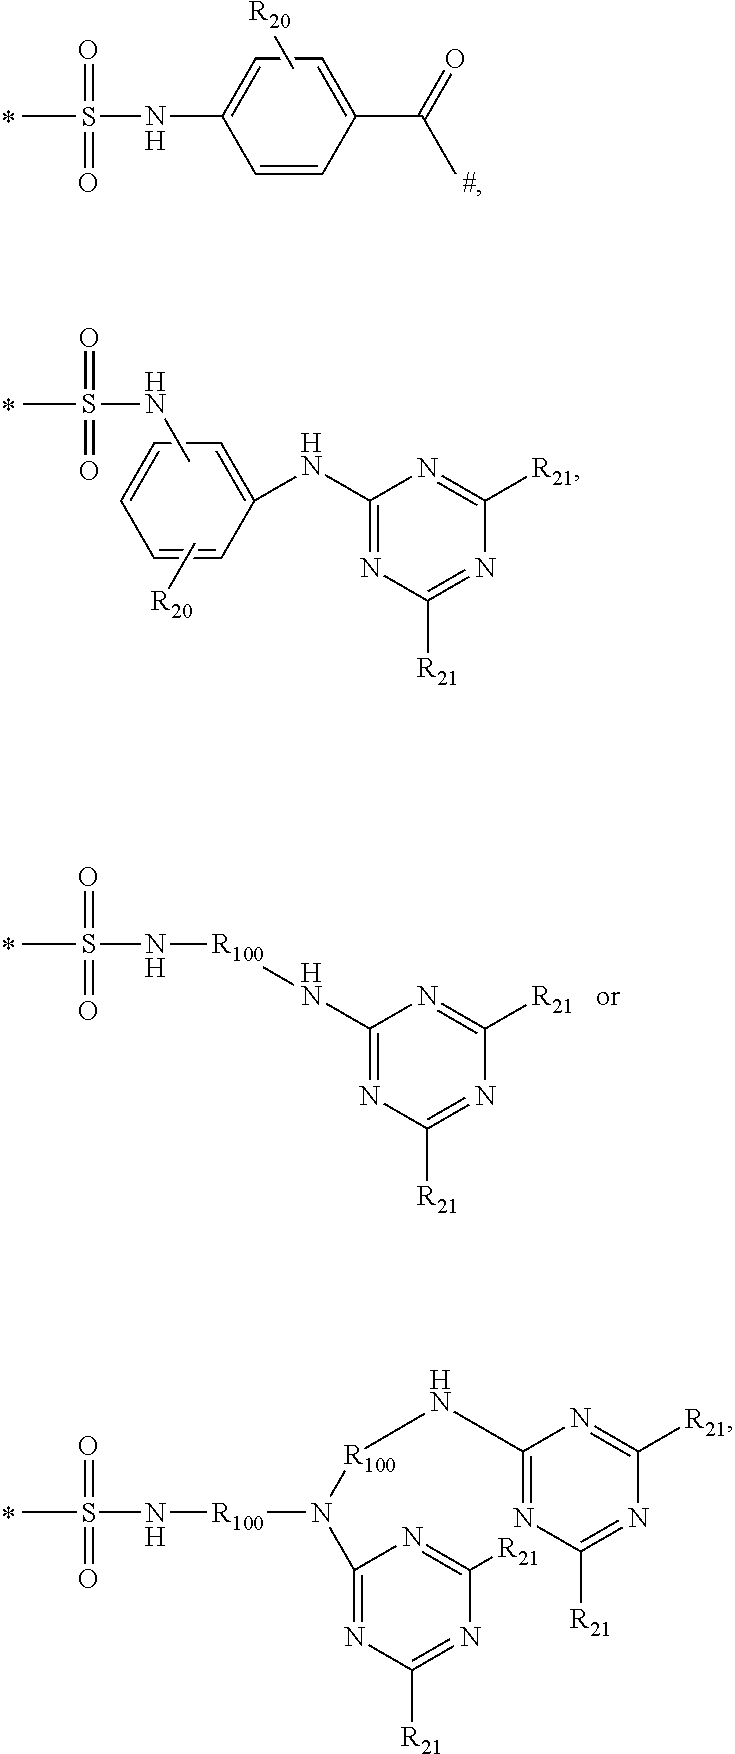 Laundry detergent composition comprising particles of phthalocyanine compound